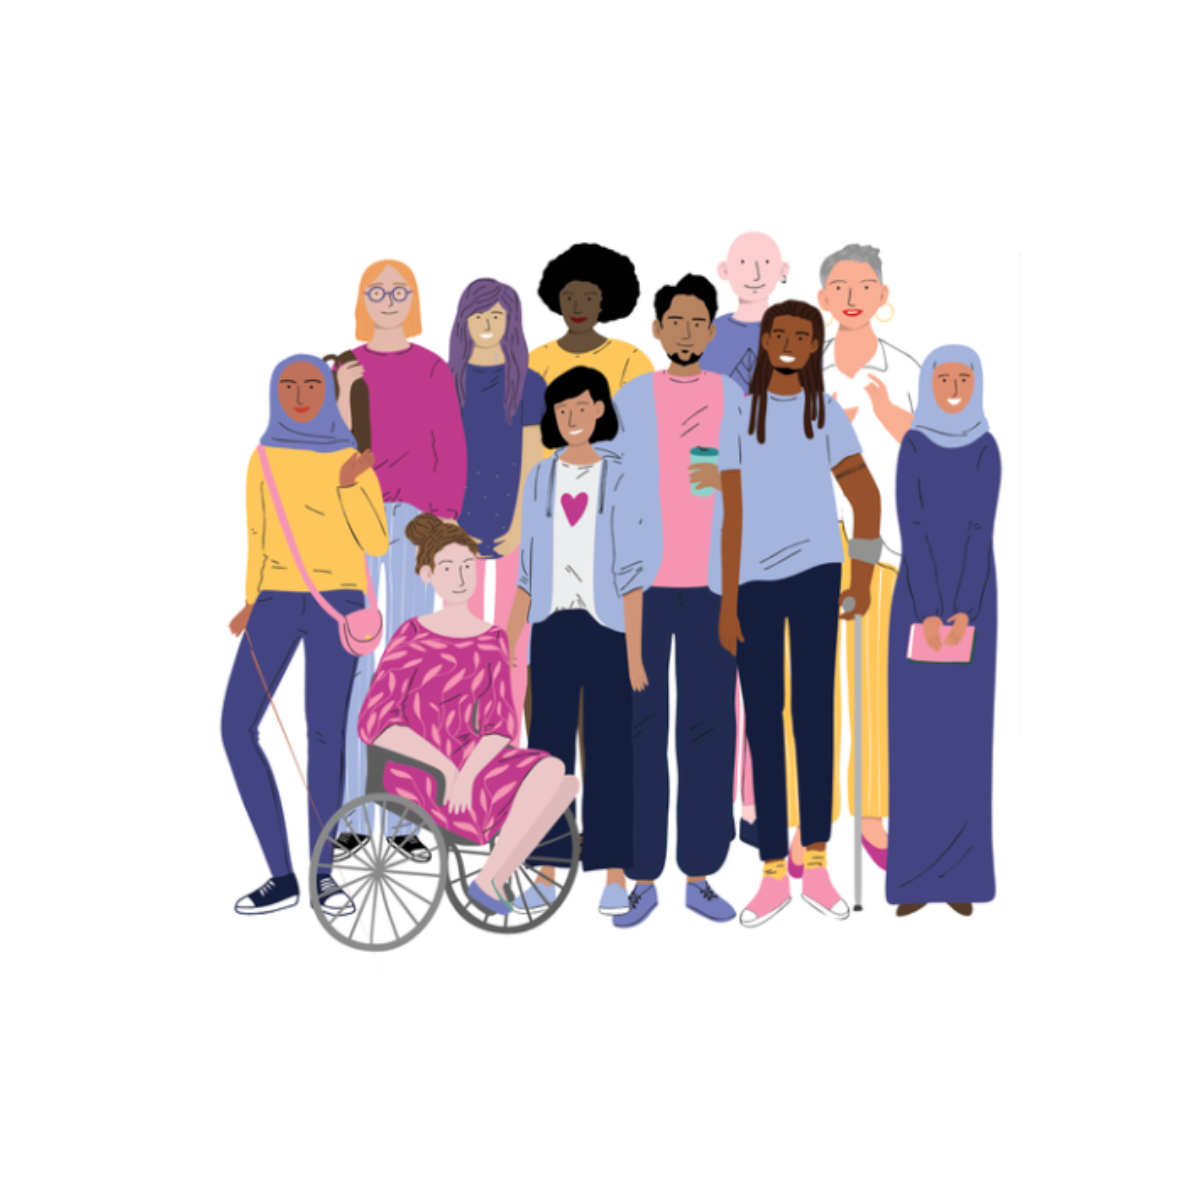 Illustration of a large, diverse group of people